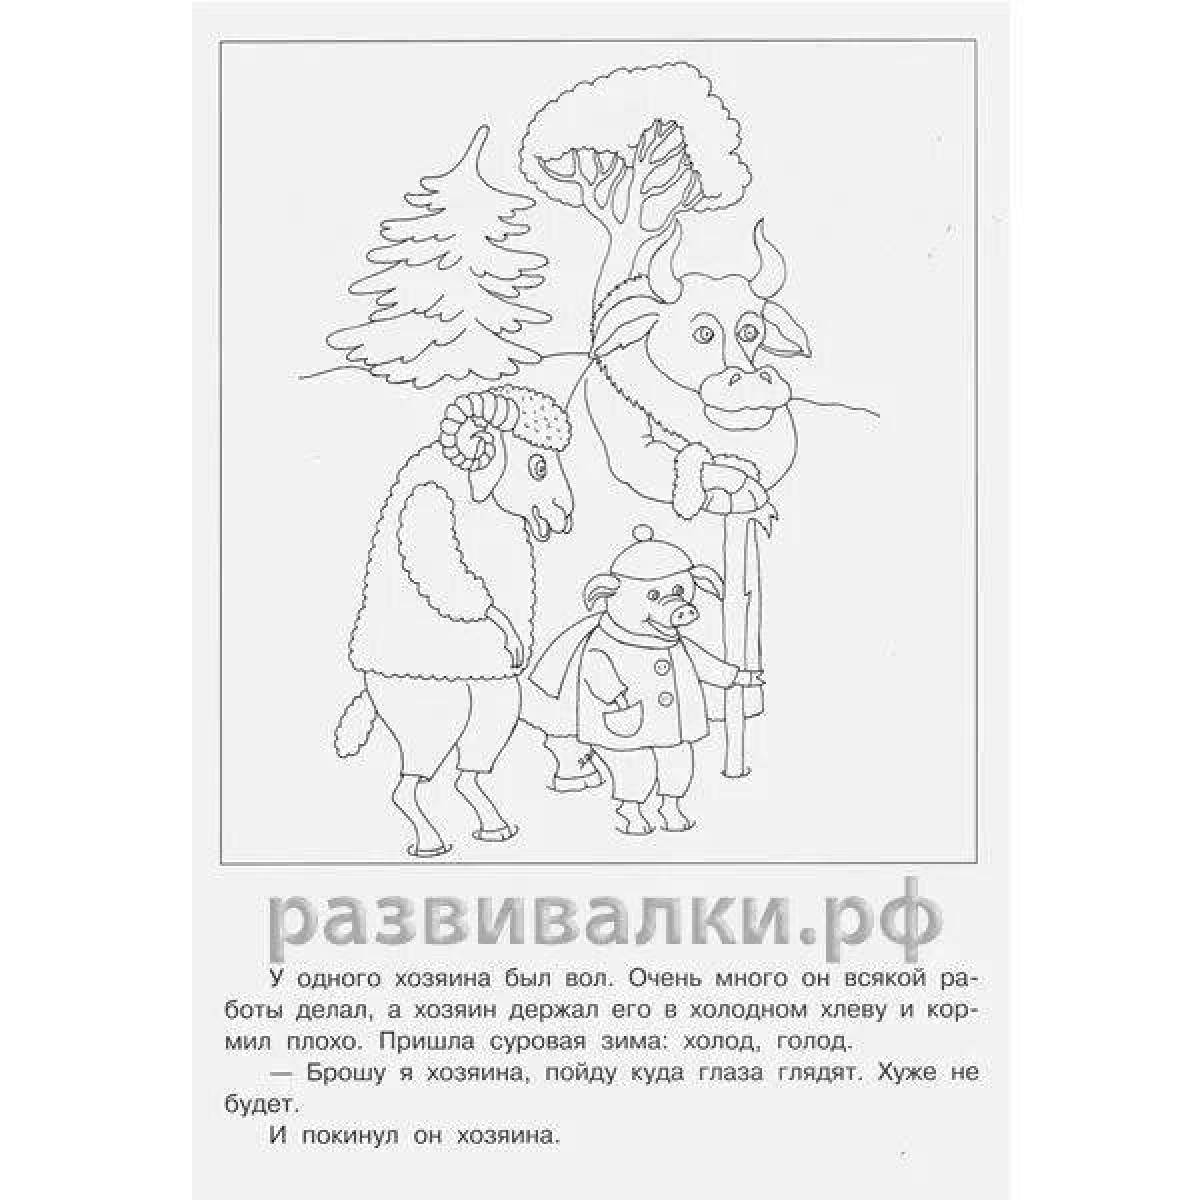 Adorable winter hut coloring book for kids